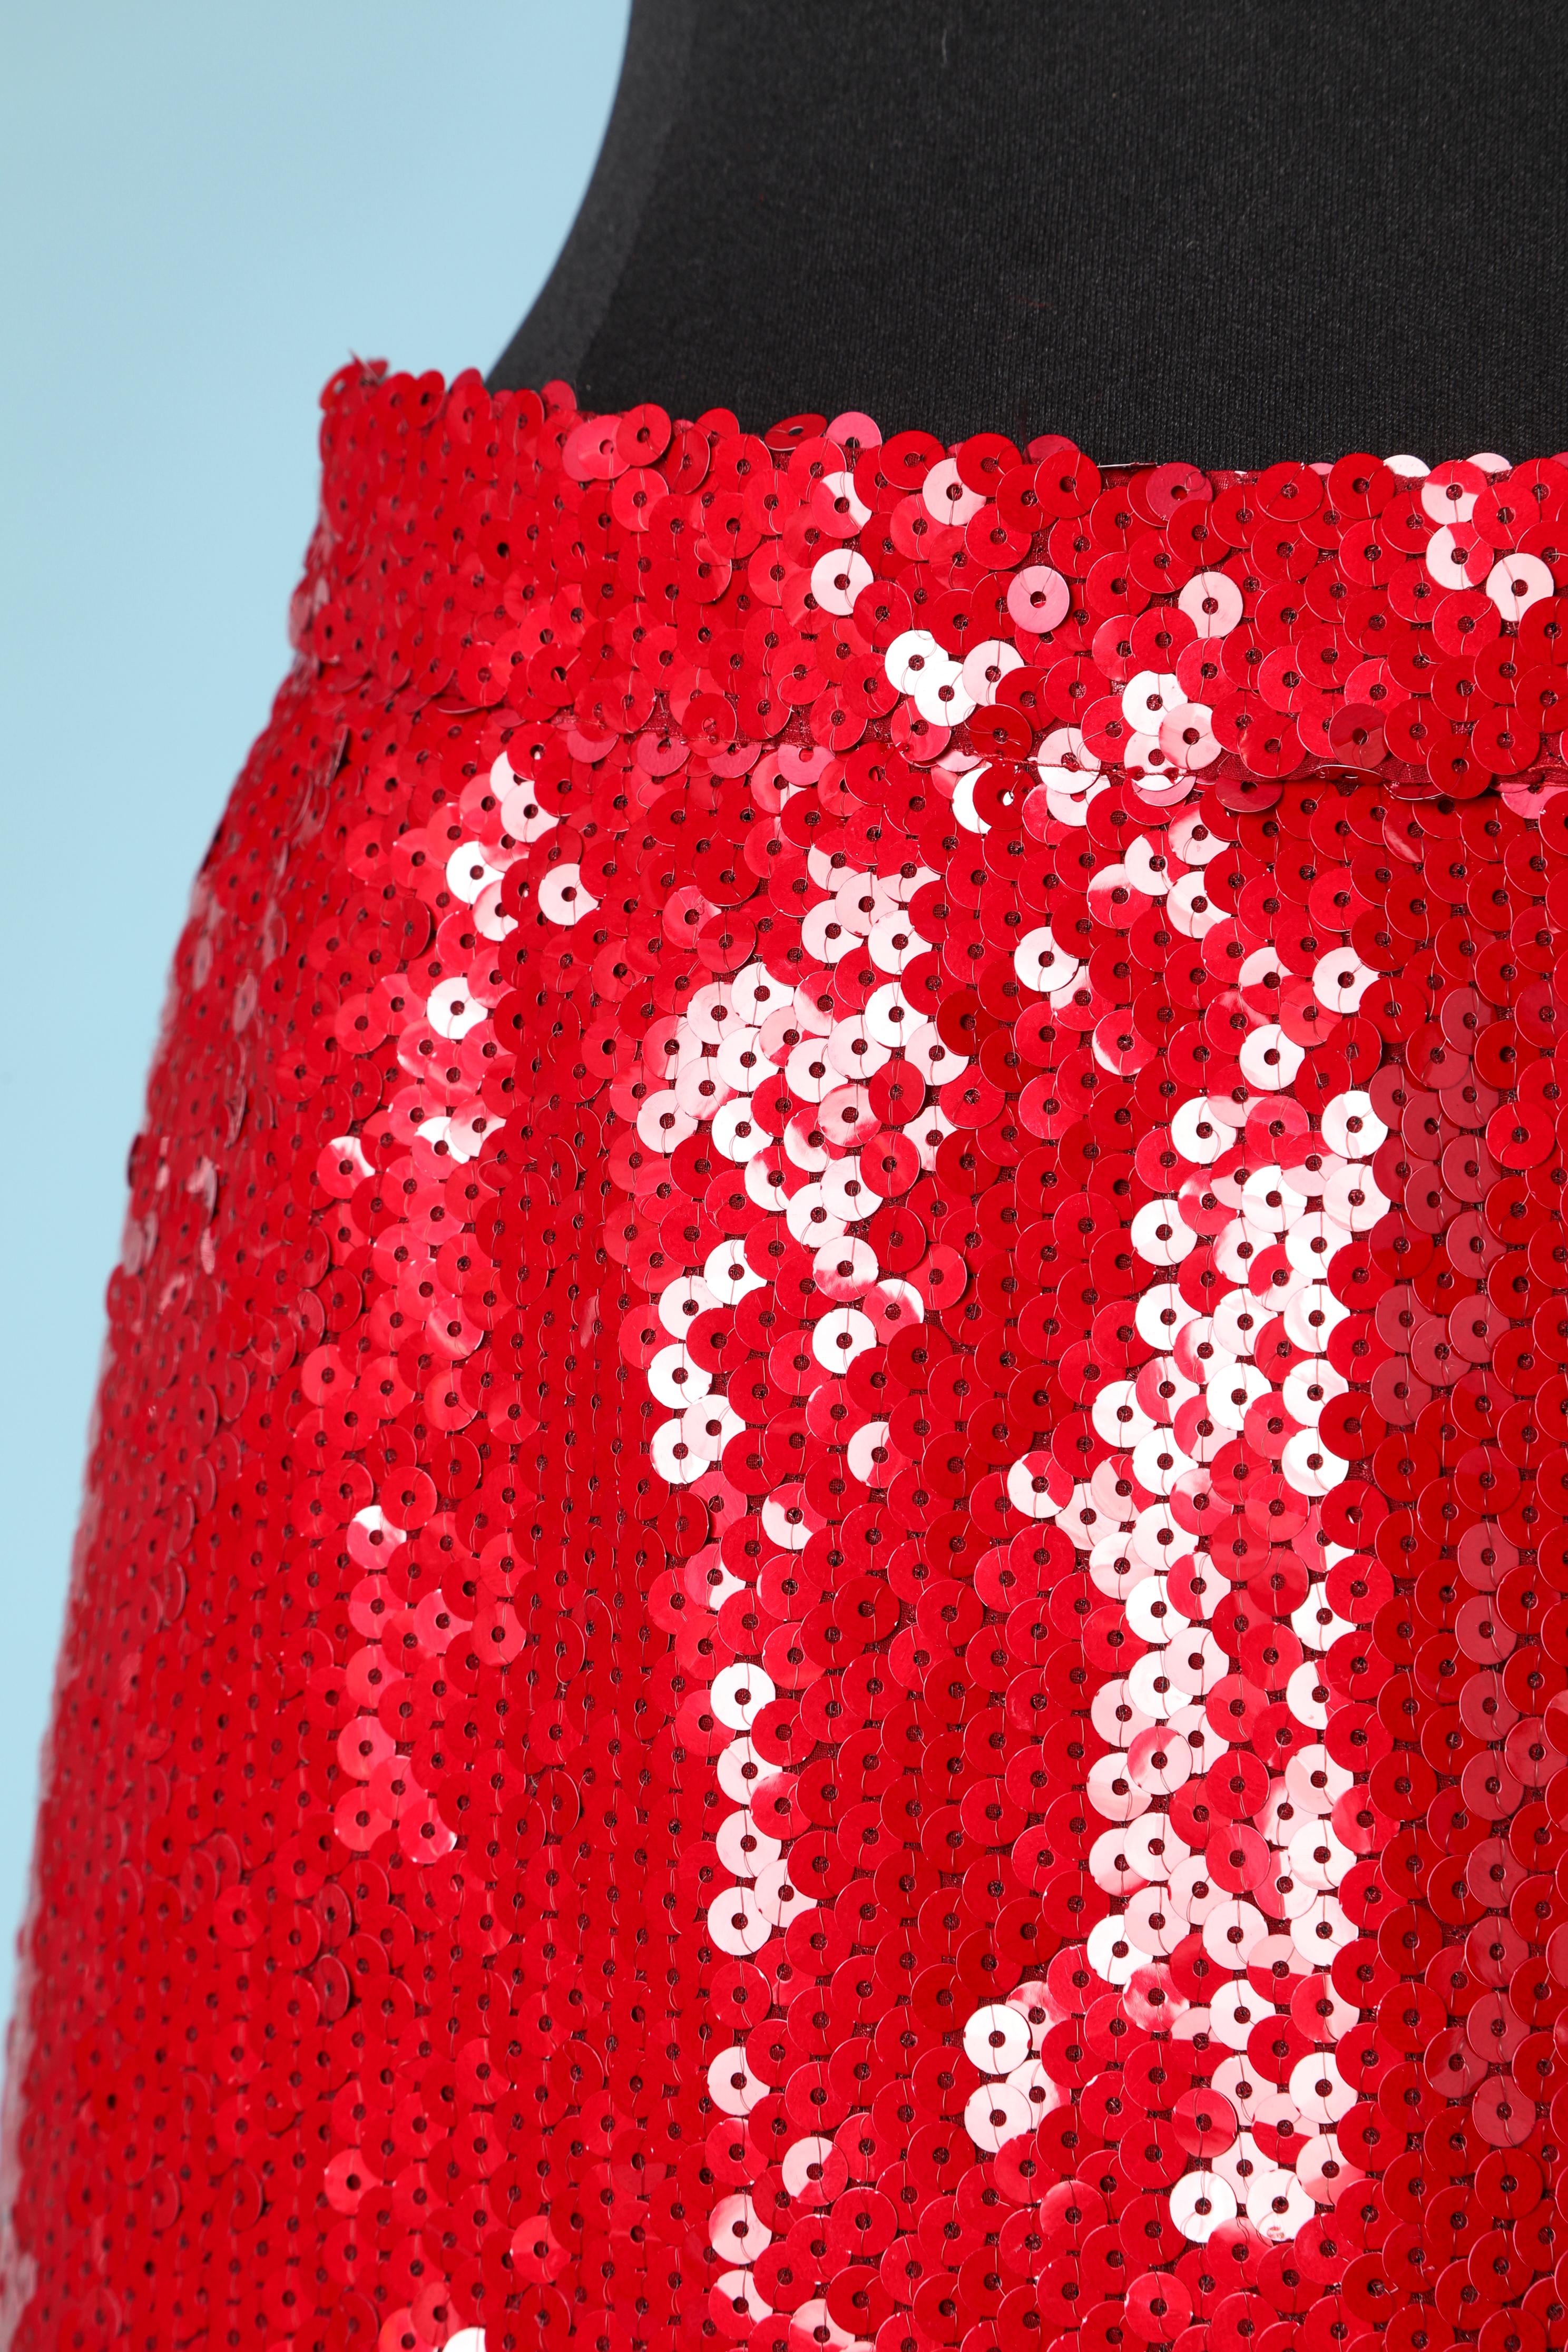 Red sequin straight skirt.
SIZE 10 